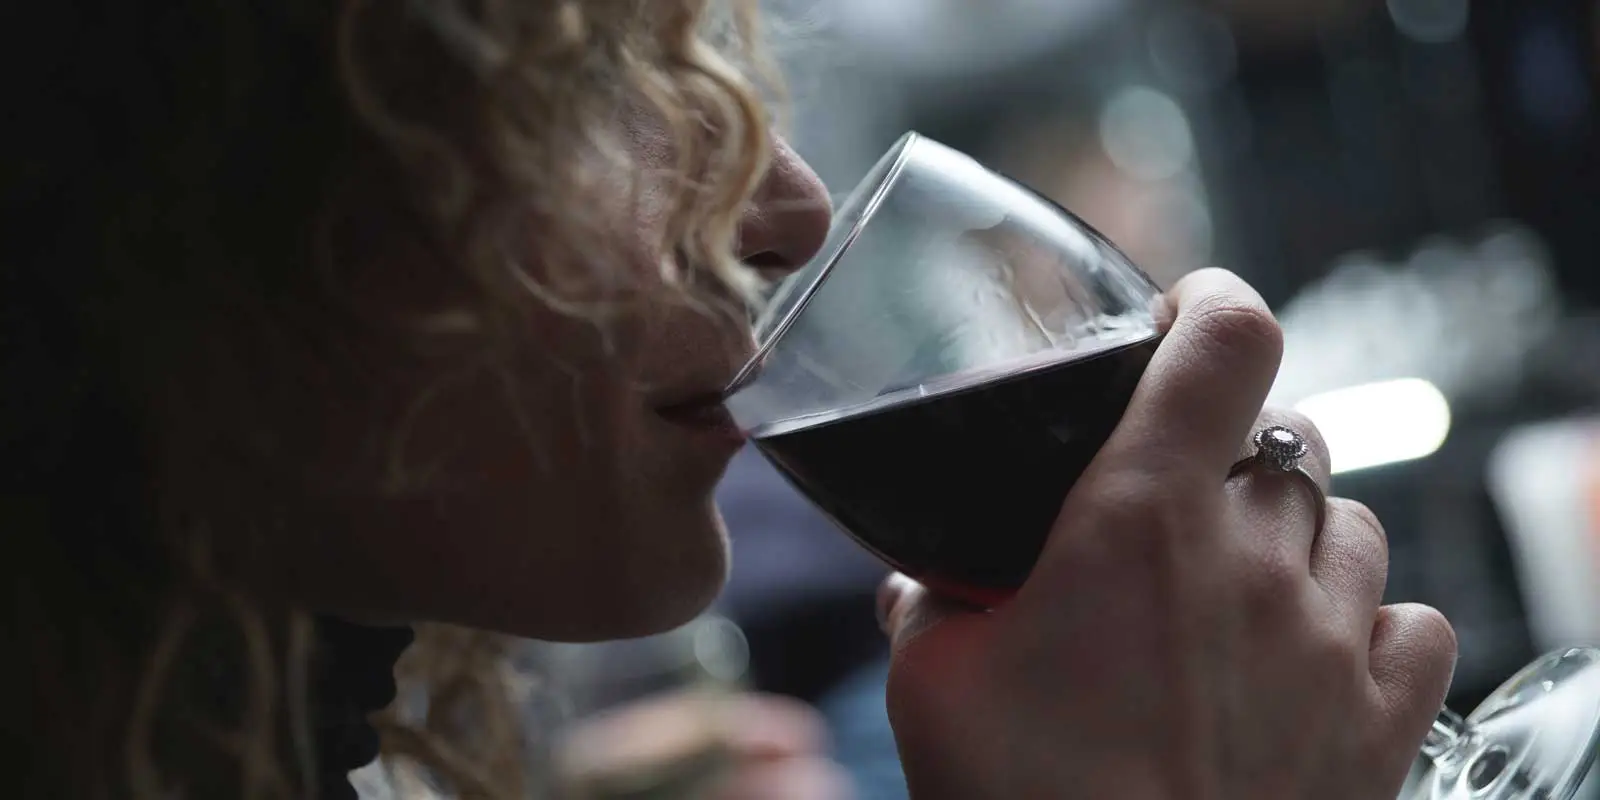 Closeup photo of a woman drinking a glass of red wine